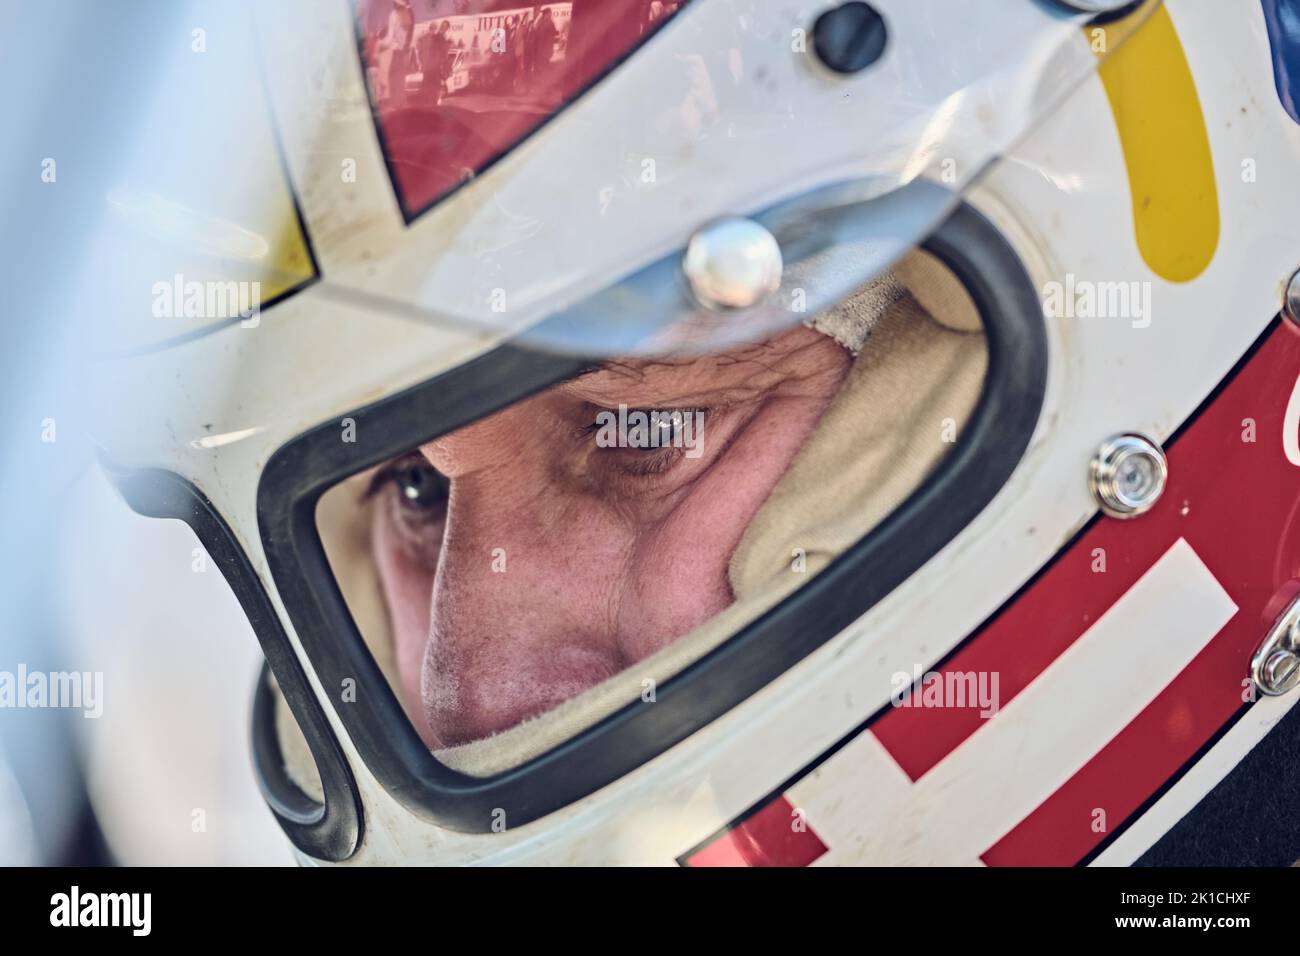 Goodwood, Chichester, UK. 17th Sept, 2022. Danish 24 Hours of Le Mans winner Tom Kristensen during the 2022 Goodwood Revival (Photo by Gergo Toth / Alamy Live News) Stock Photo